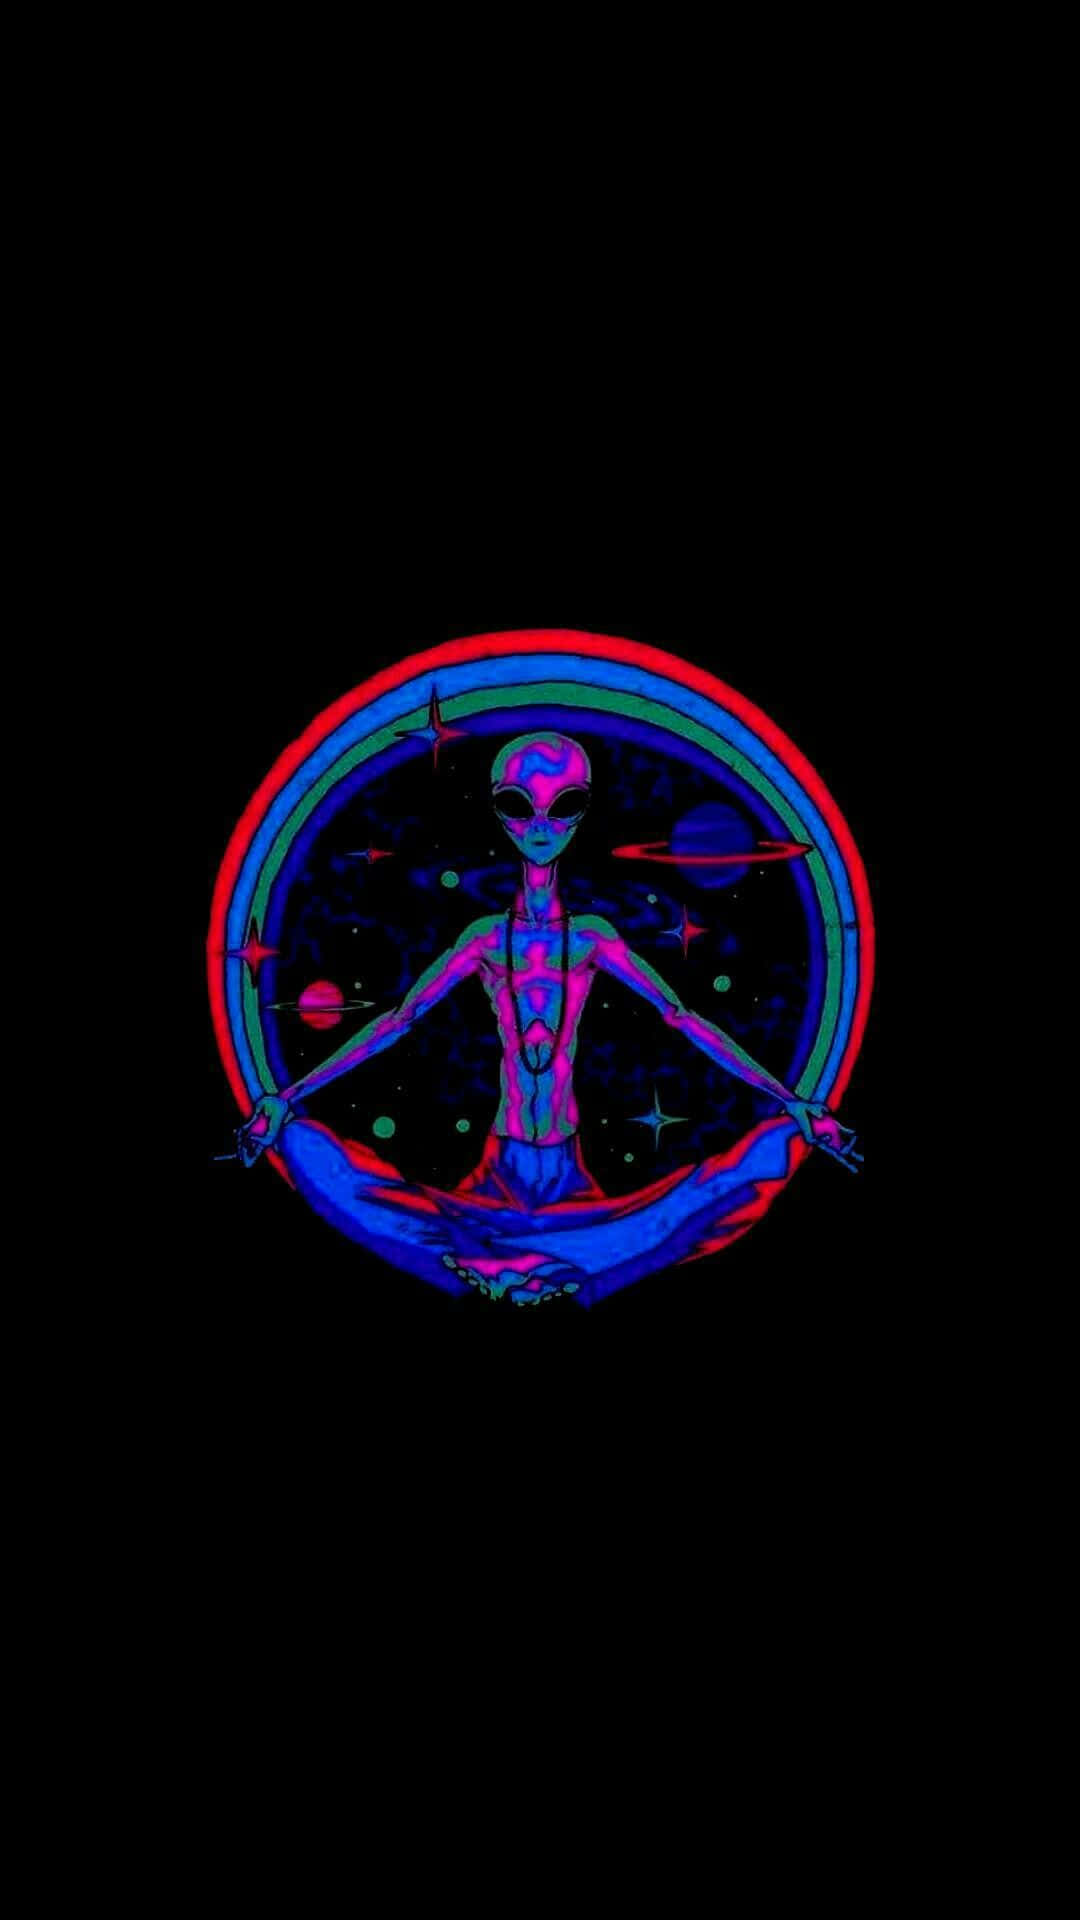 A Blue And Red Alien Sitting In A Circle Wallpaper